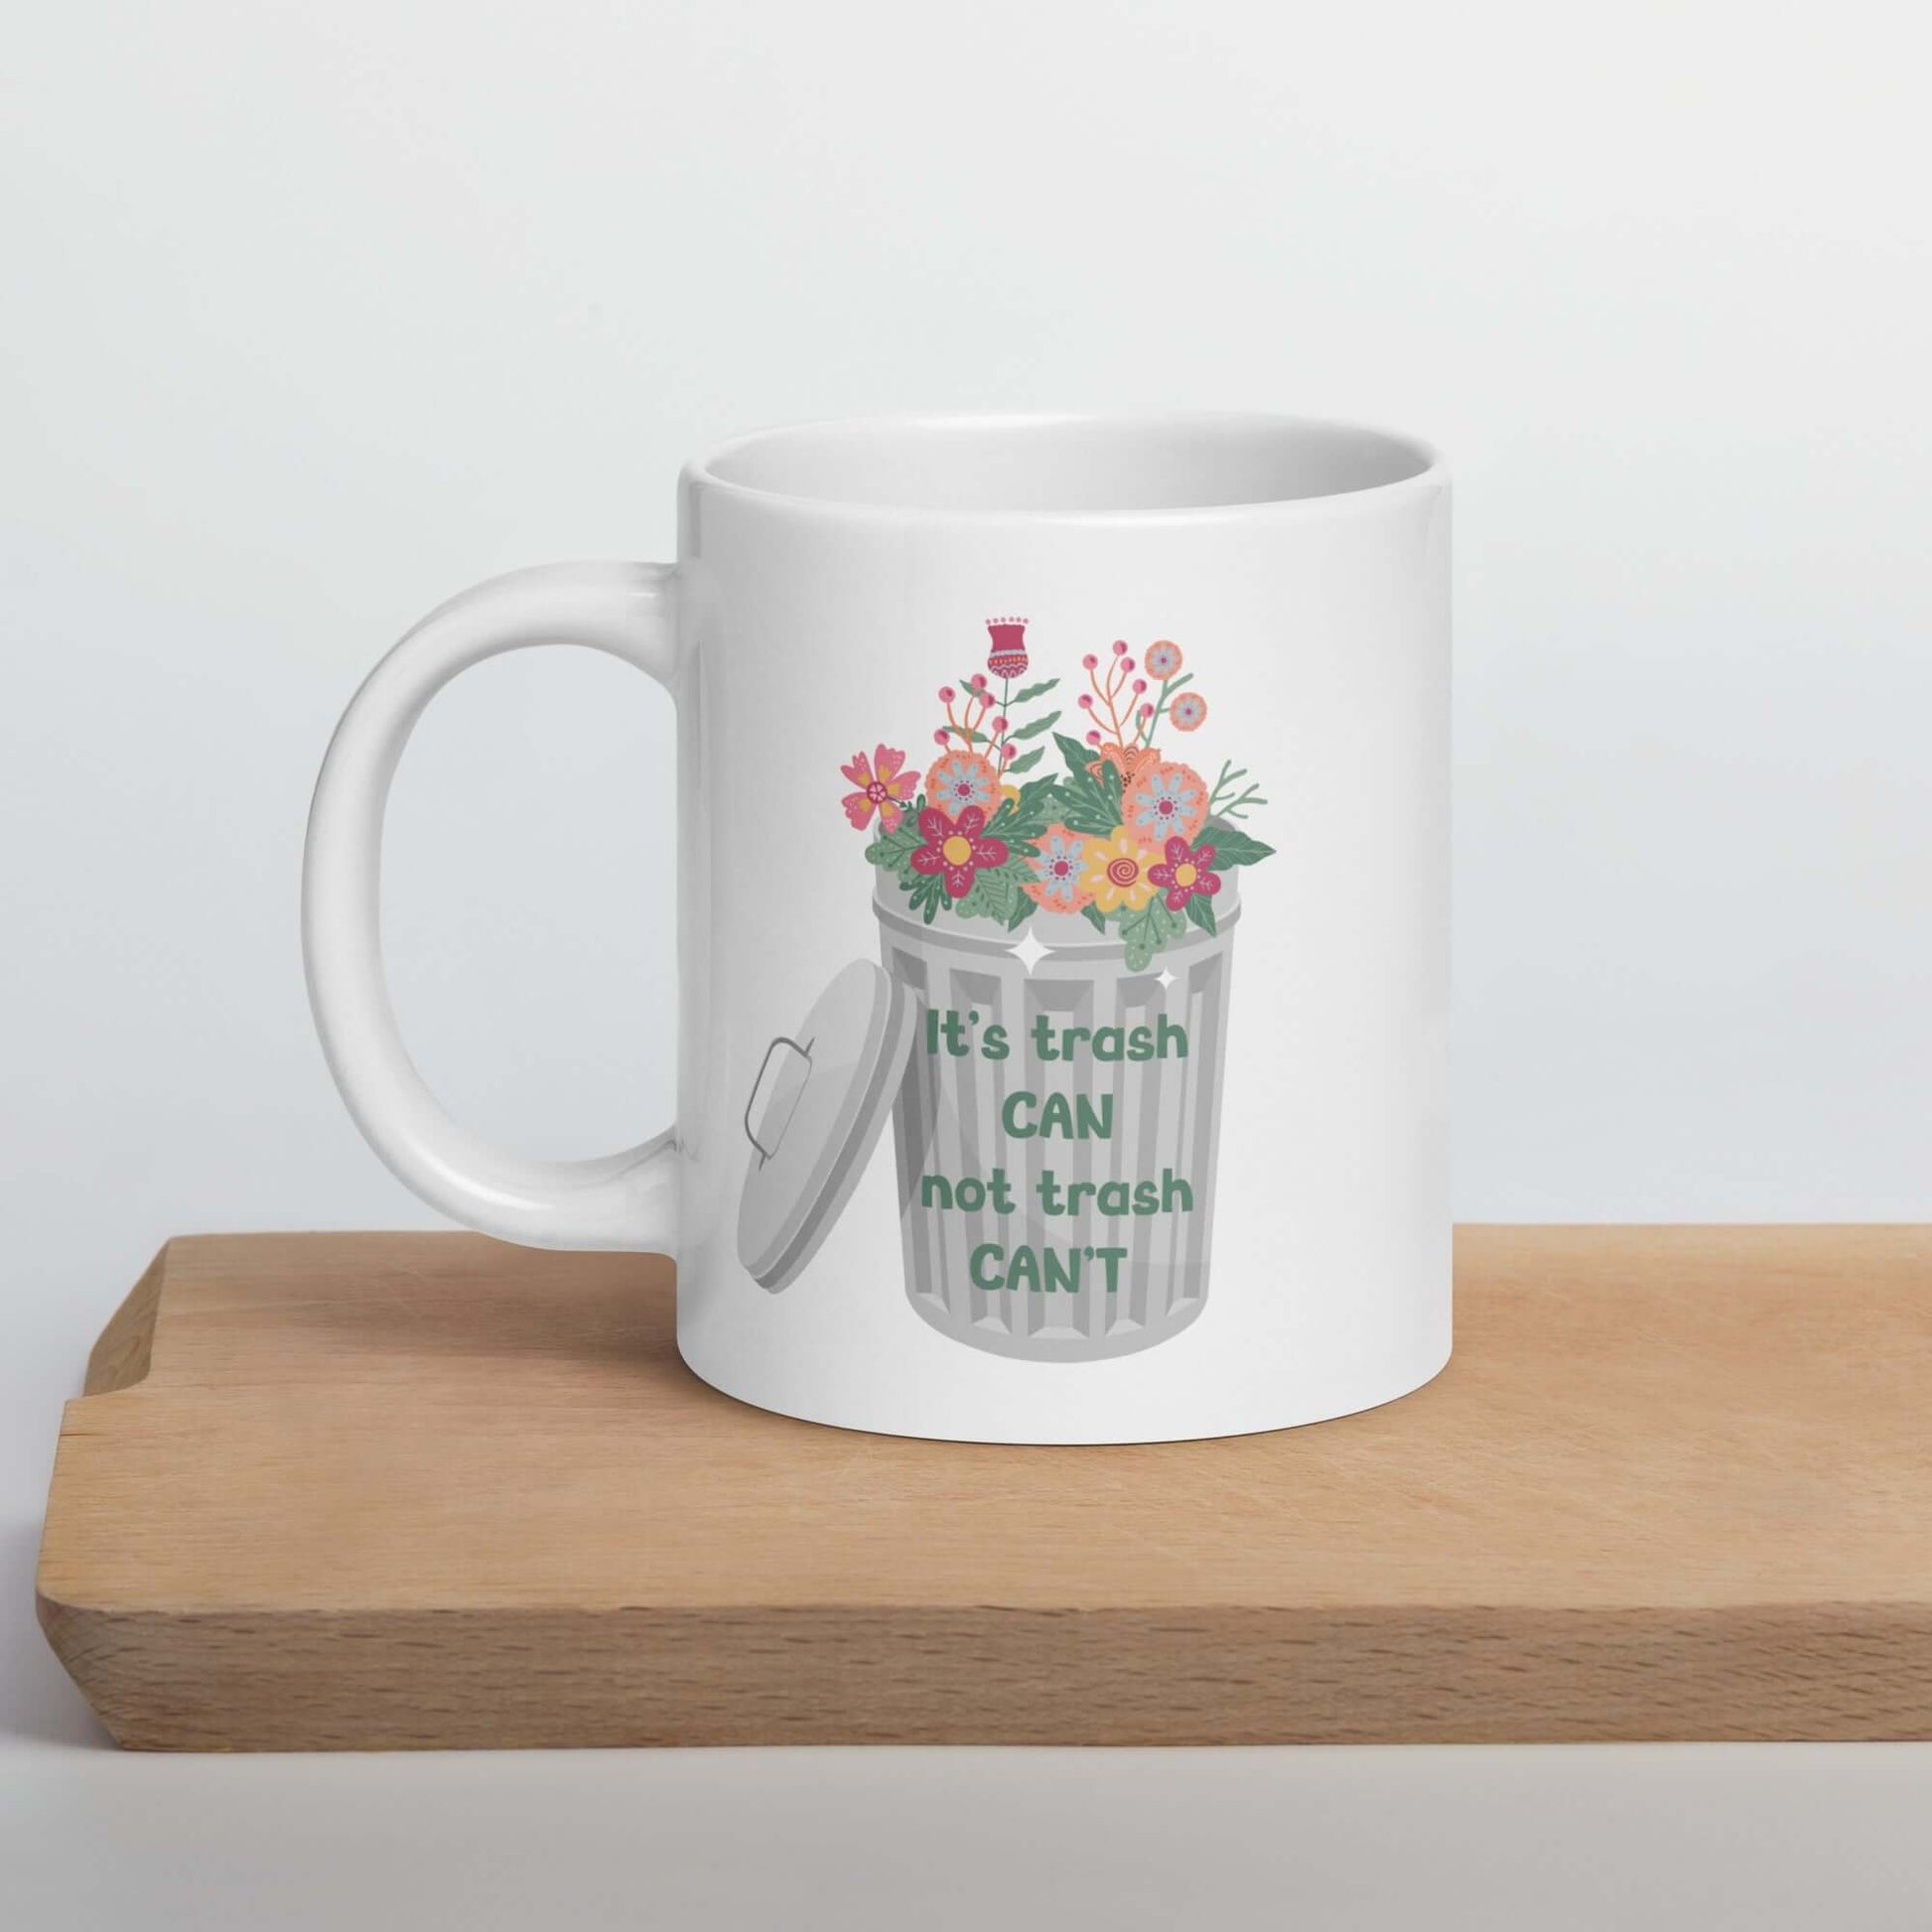 White ceramic coffee mug with graphic of trash can with flowers growing in it. The phrase It's trash can not trash can't is printed on the trash can. The graphics are printed on both sides of the mug.